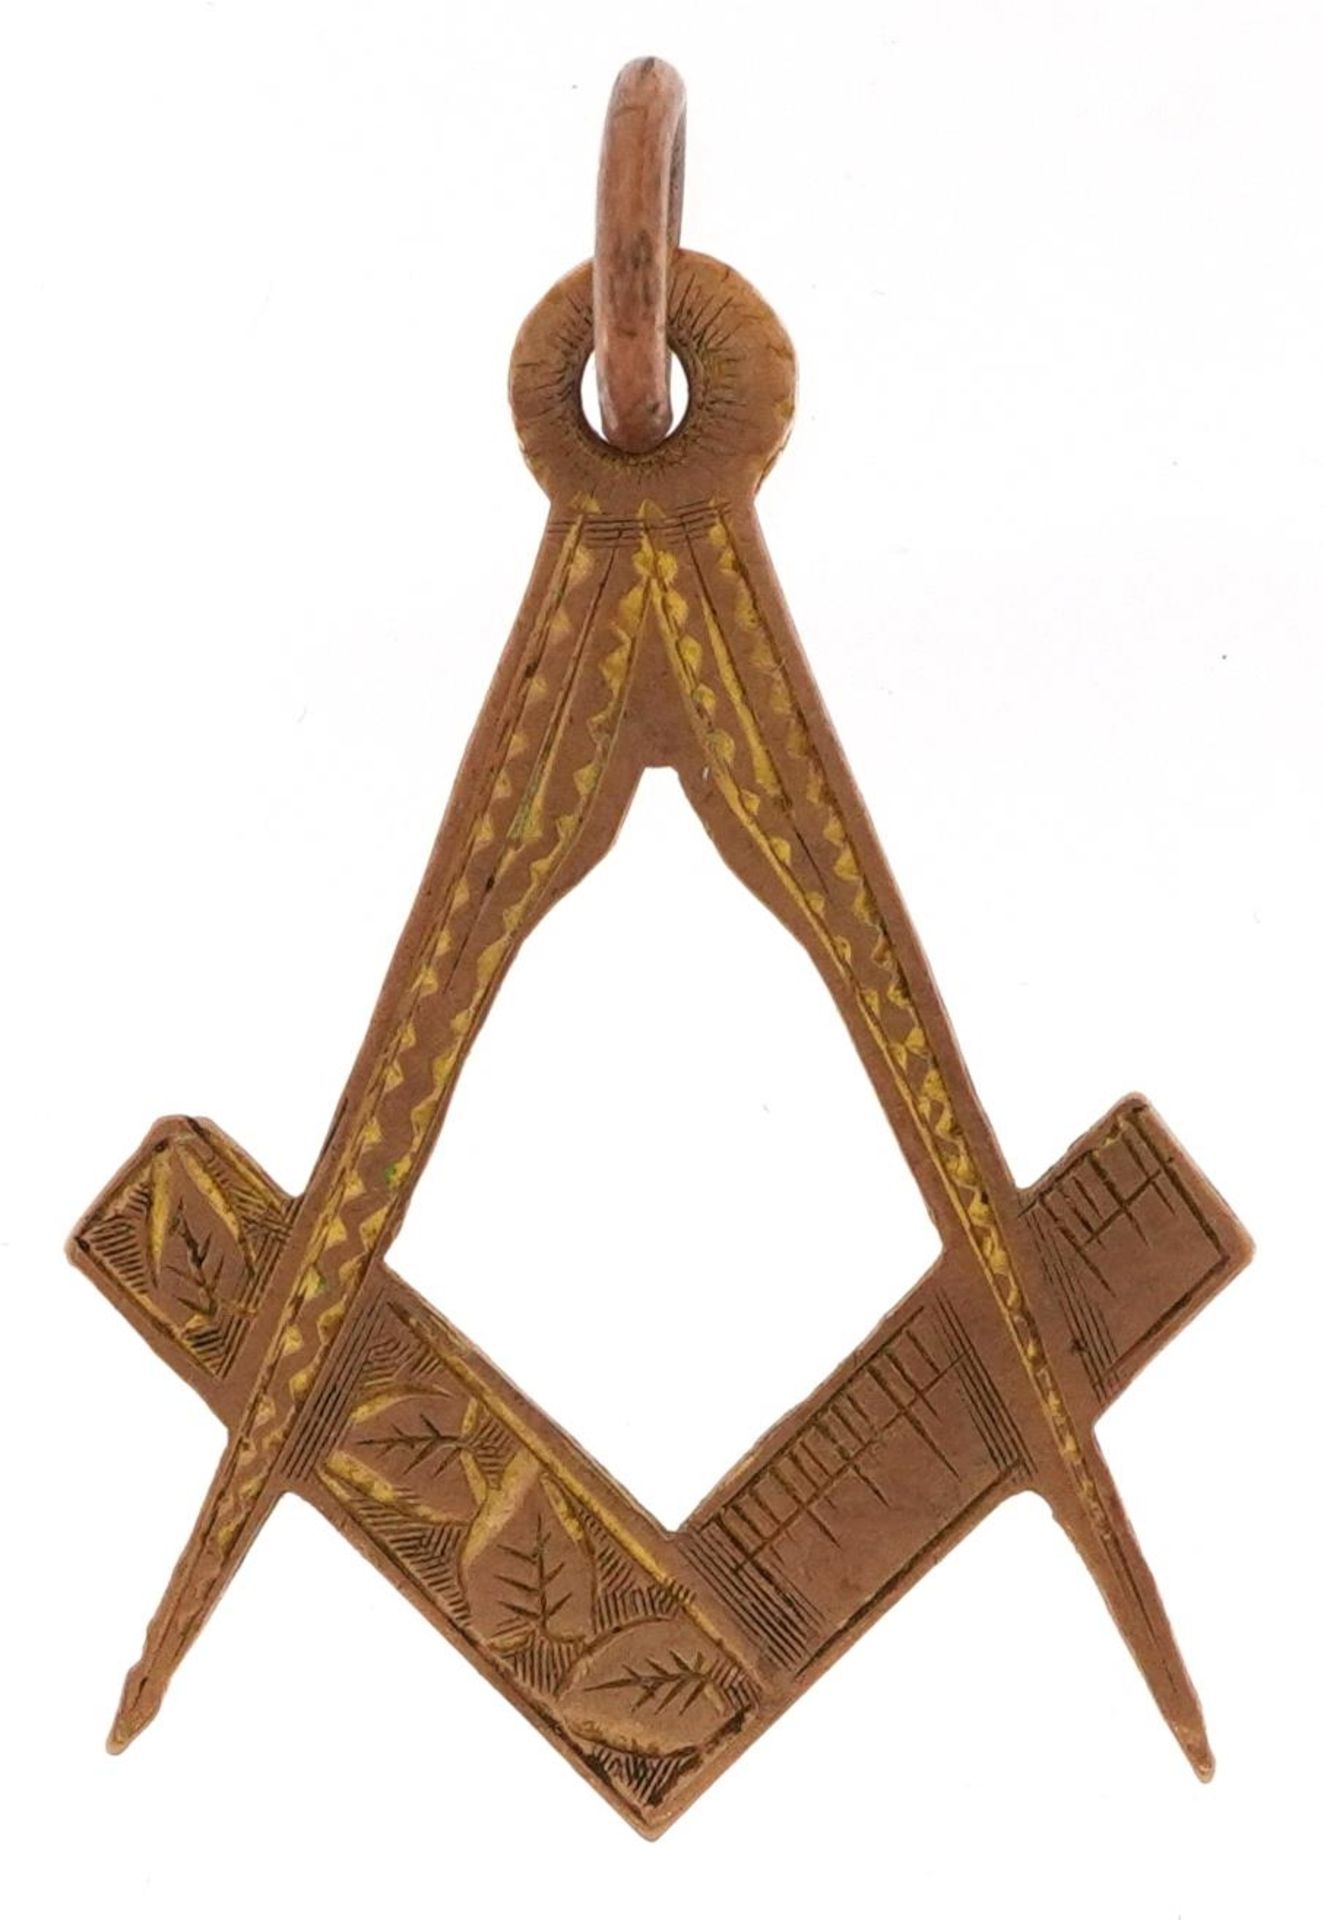 9ct gold masonic charm, 2.9cm high, 1.6g : For further information on this lot please visit